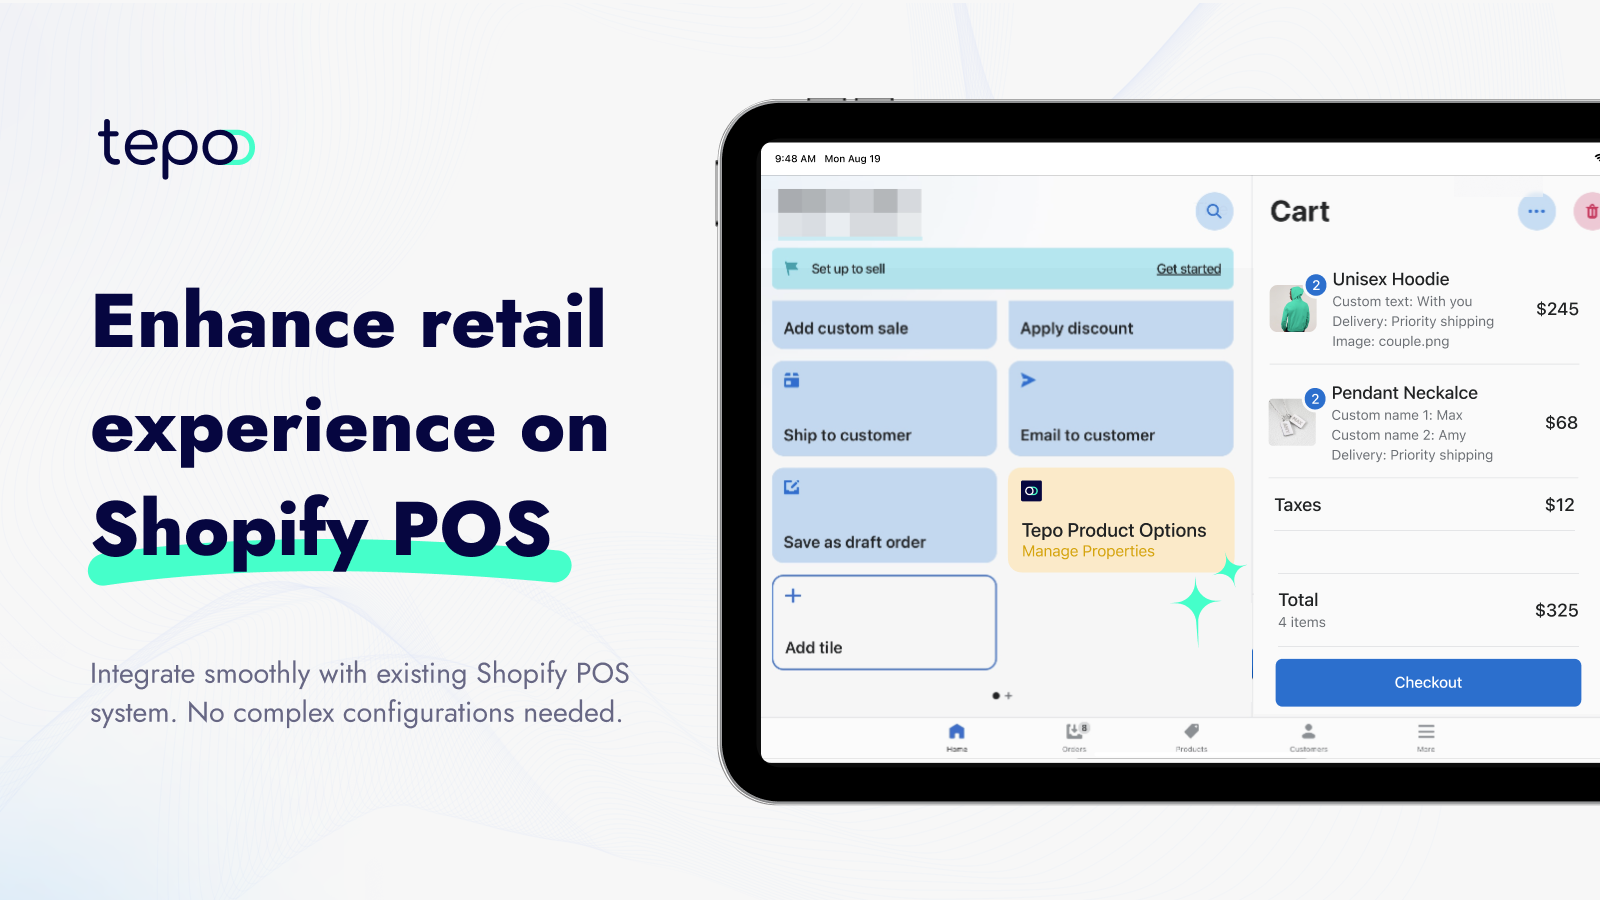 Enhance retail experience on Shopify POS